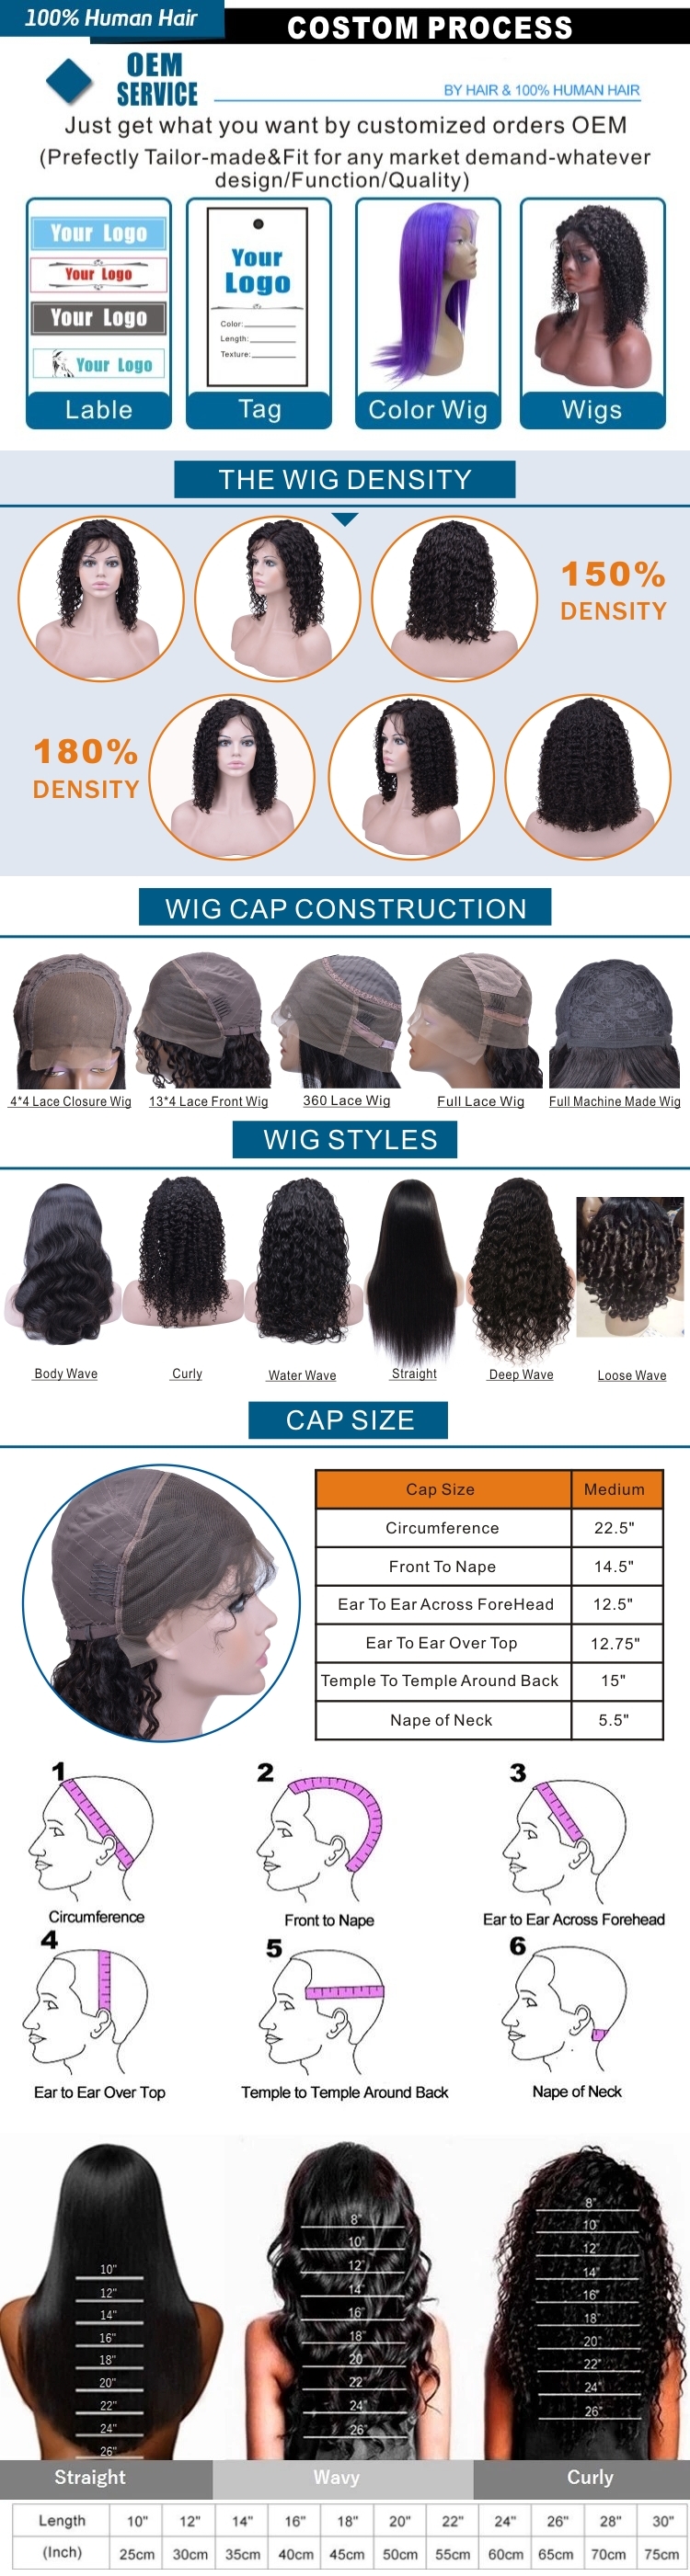 USEXY Wholesale Lace Front Wig Cap Mesh Lace Wig Caps For Making Wigs